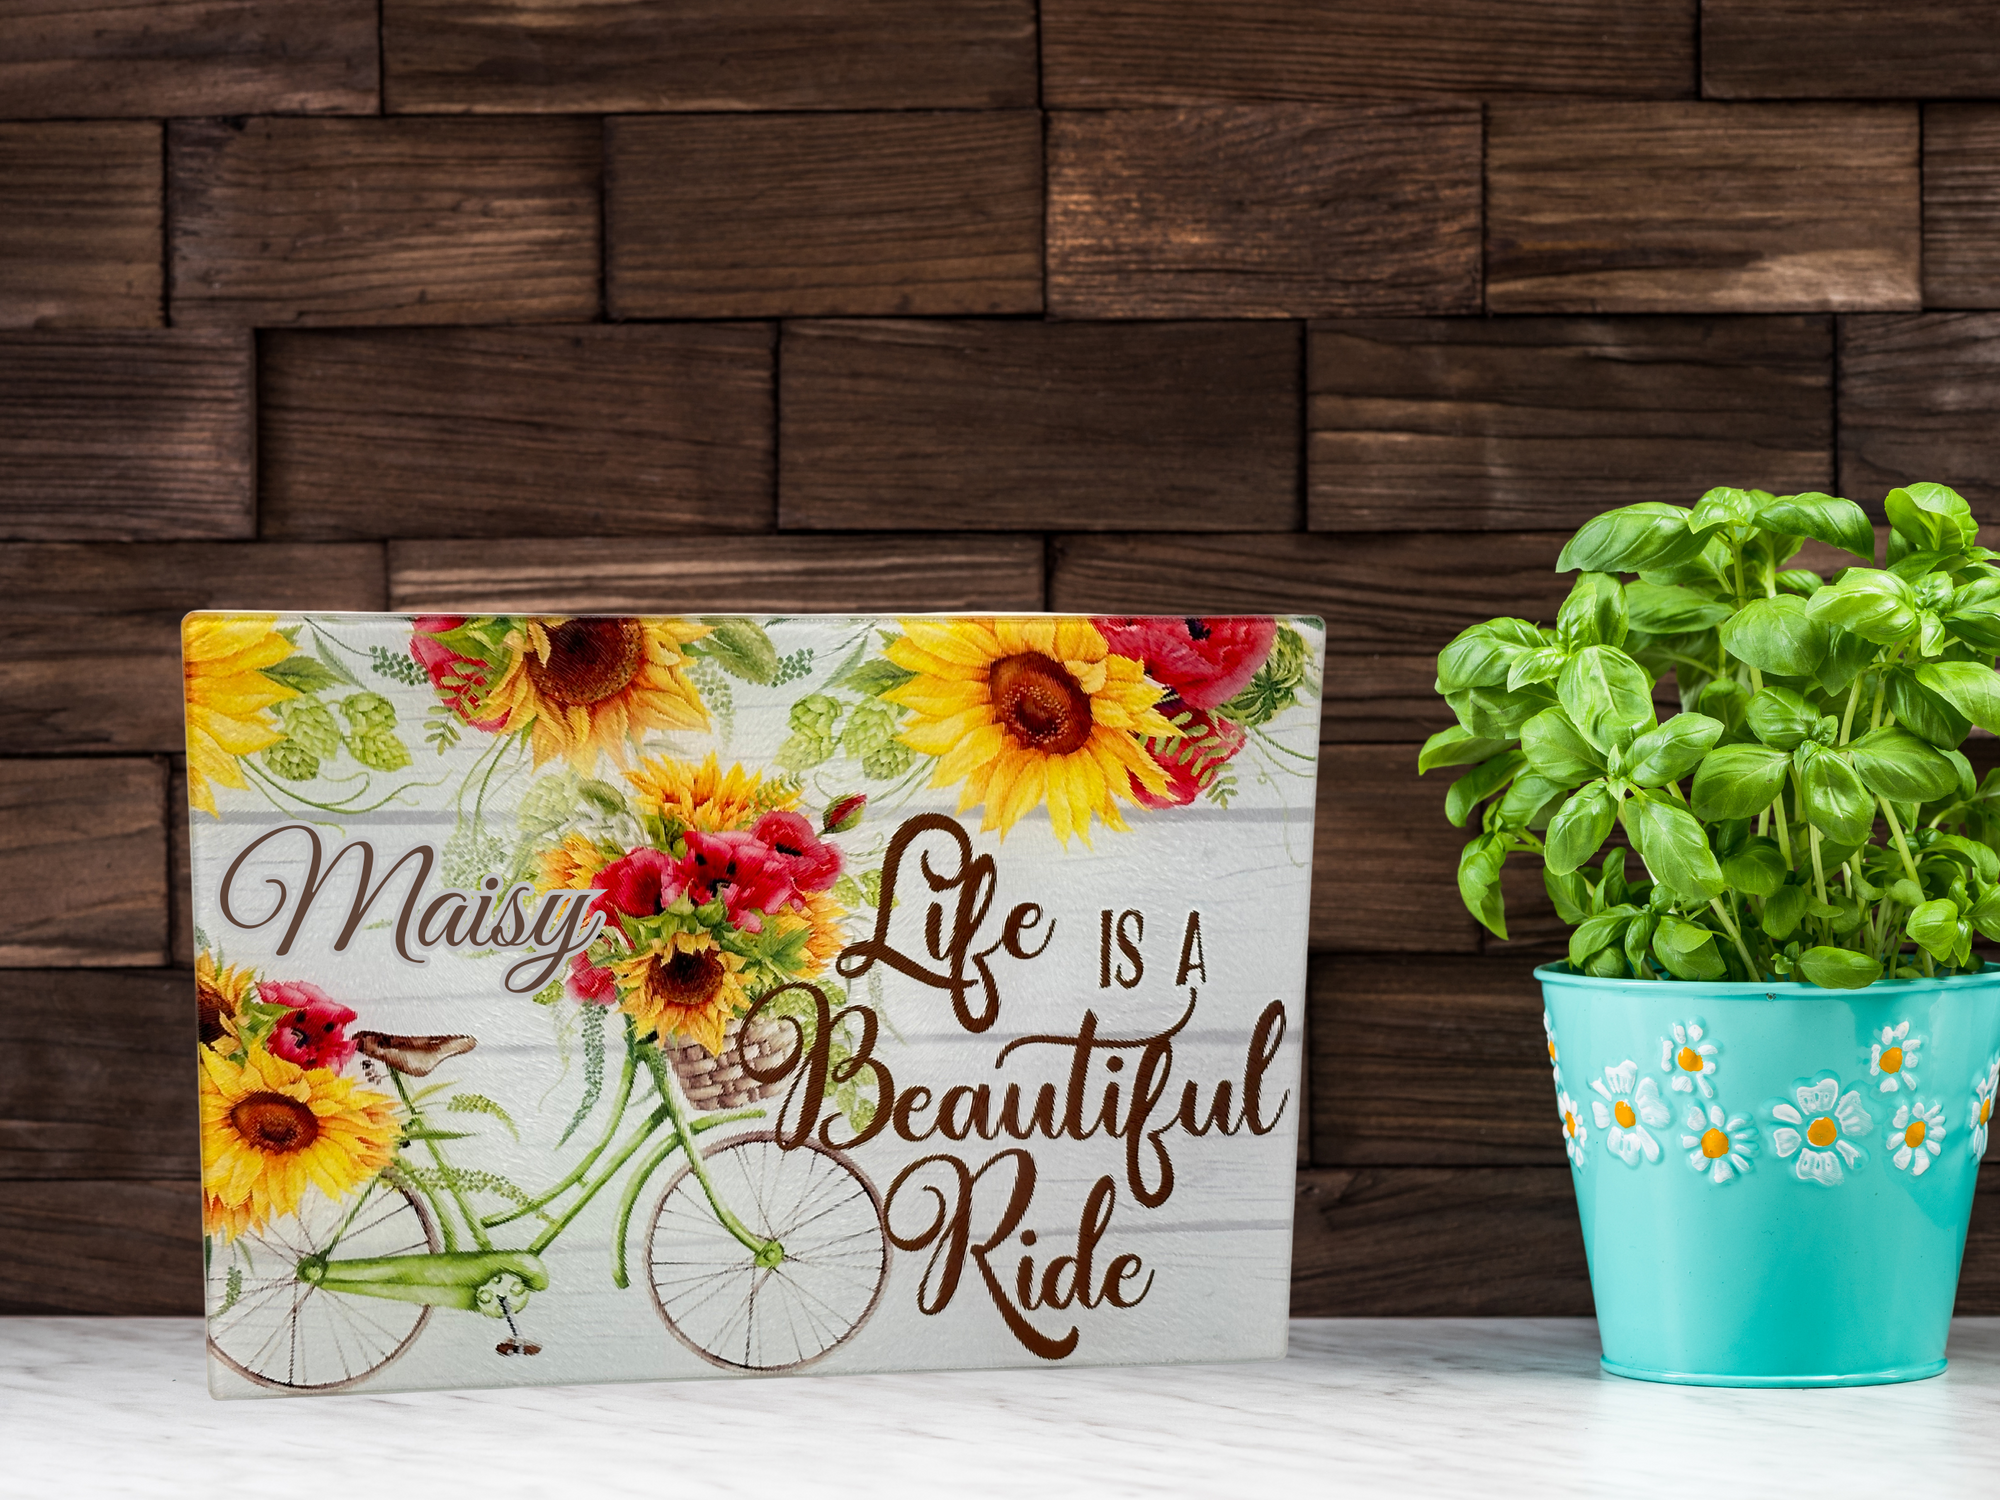 Personalized 8" x 11" Textured & Tempered Glass Cutting Board/Life is a Beautiful Ride/Design/Space Saving Kitchen Accessory/#604